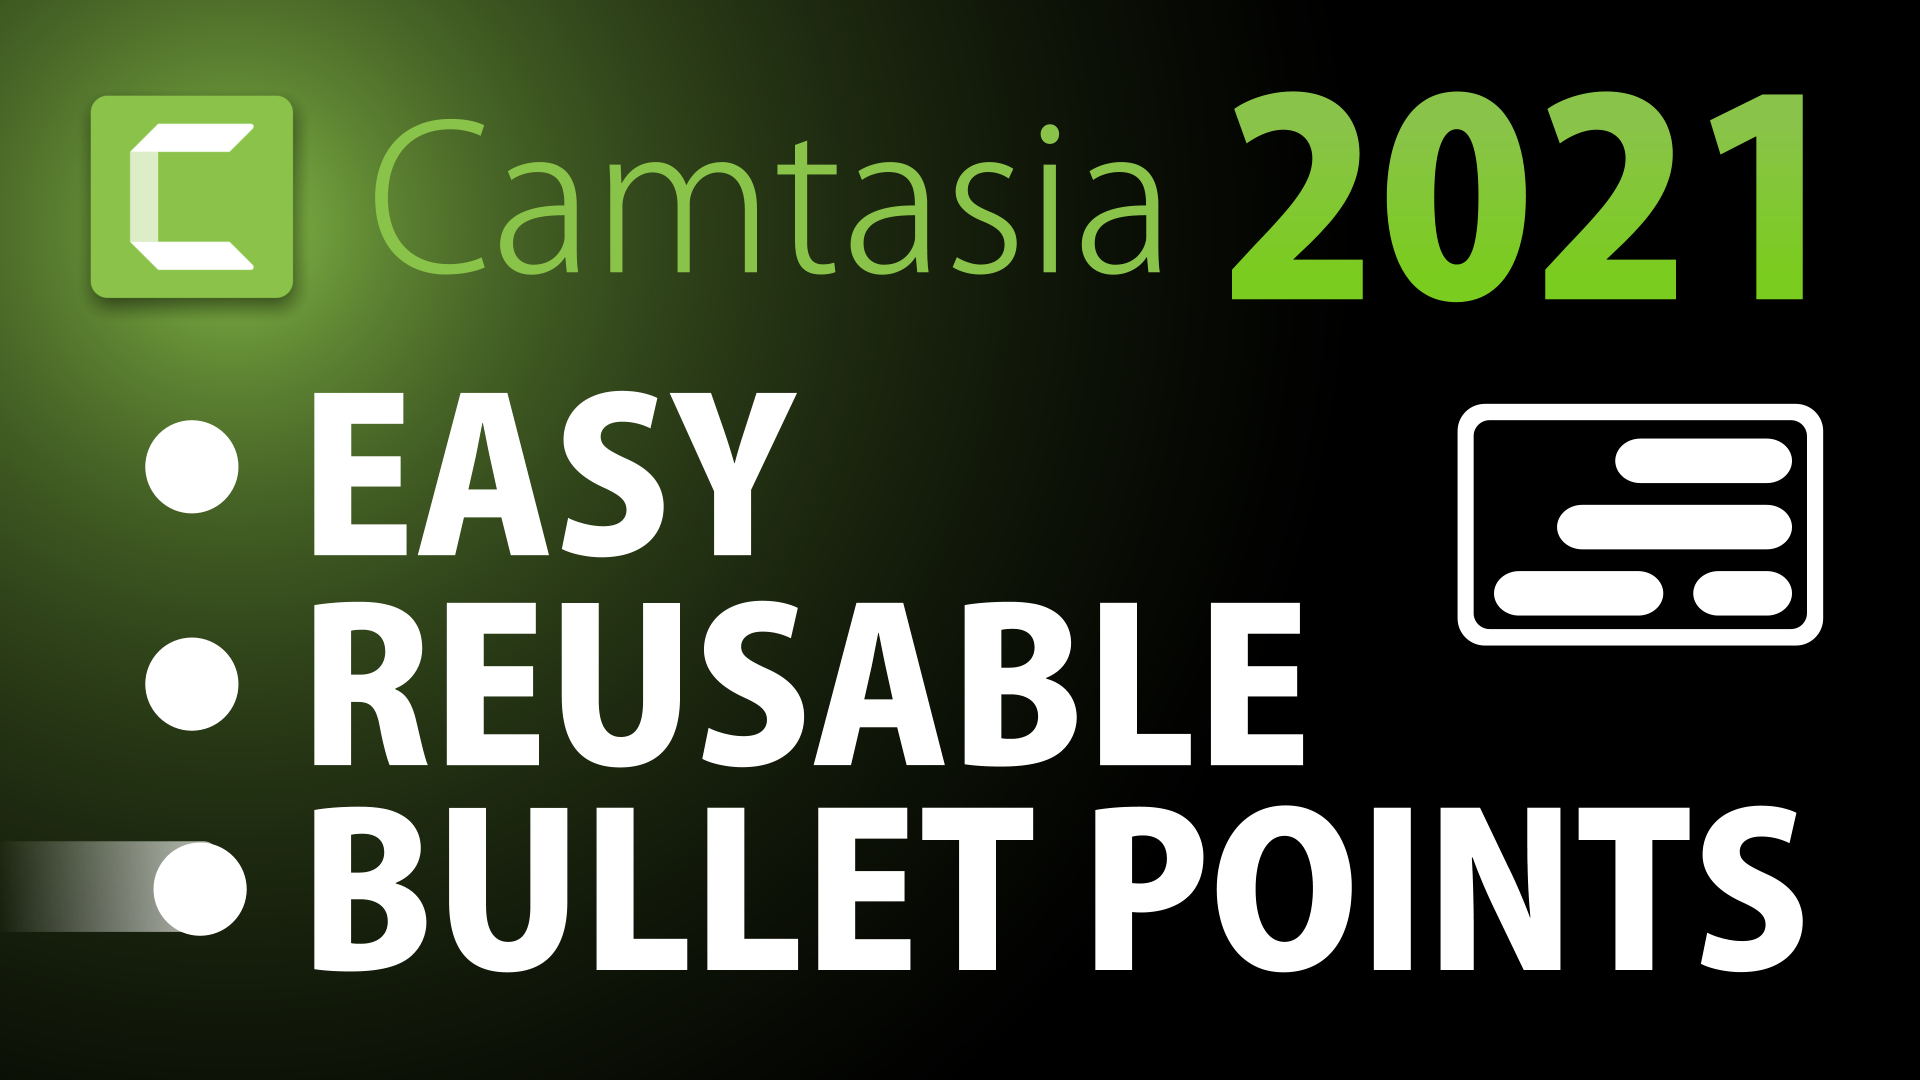 How to create easy, reusable bullet points with Quick Properties and Customisations in Camtasia 2021